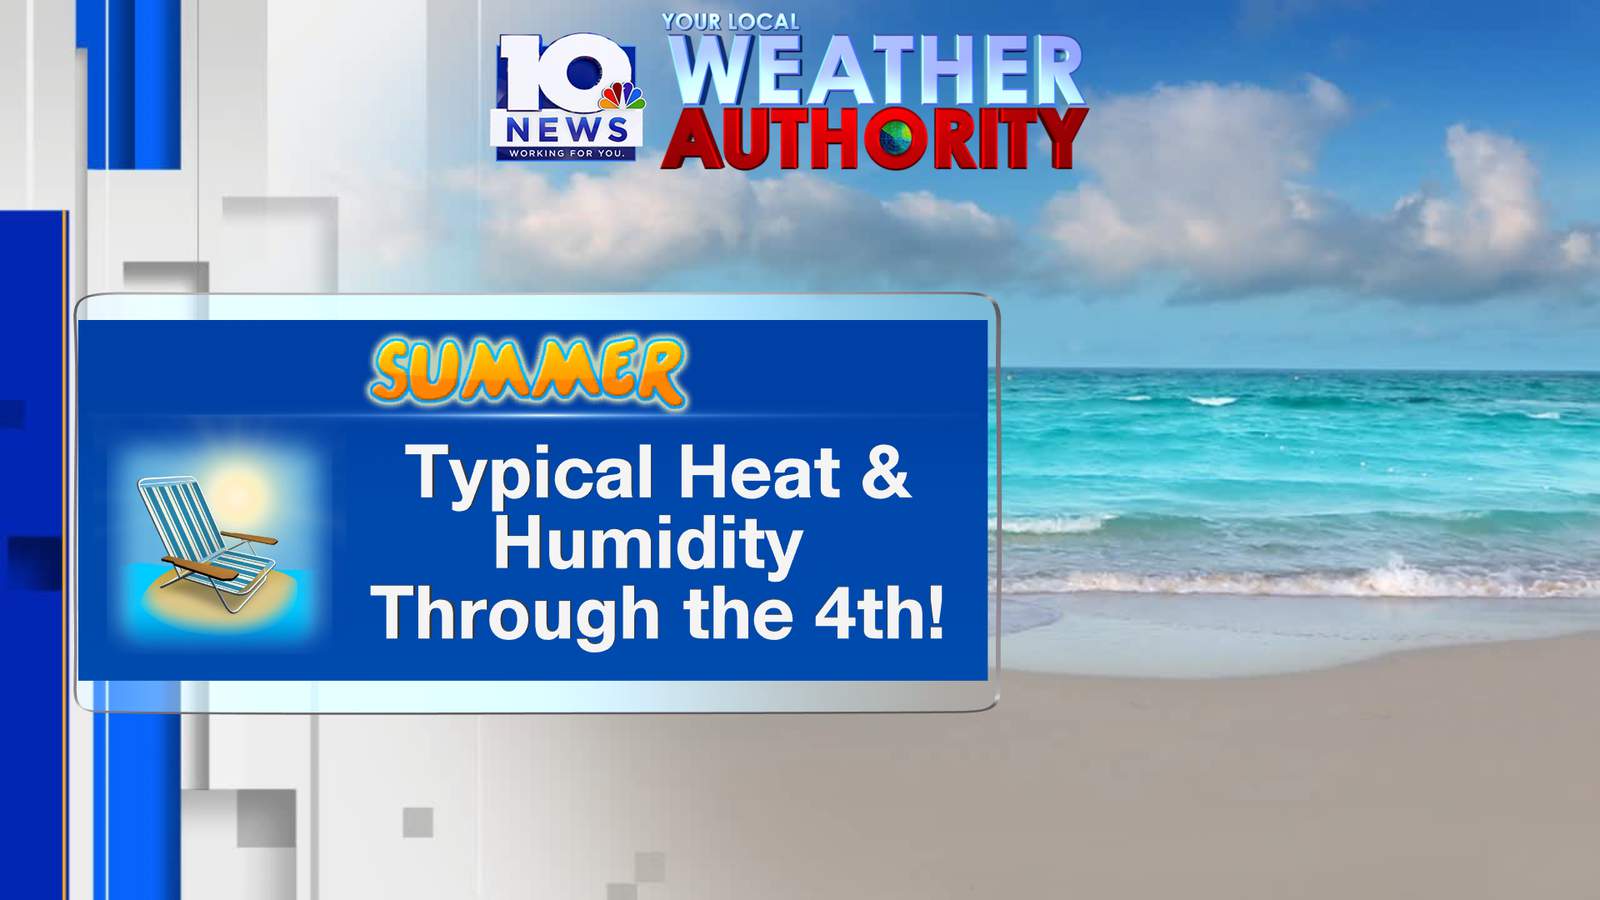 Catching up on some summer heat, humidity through the 4th of July